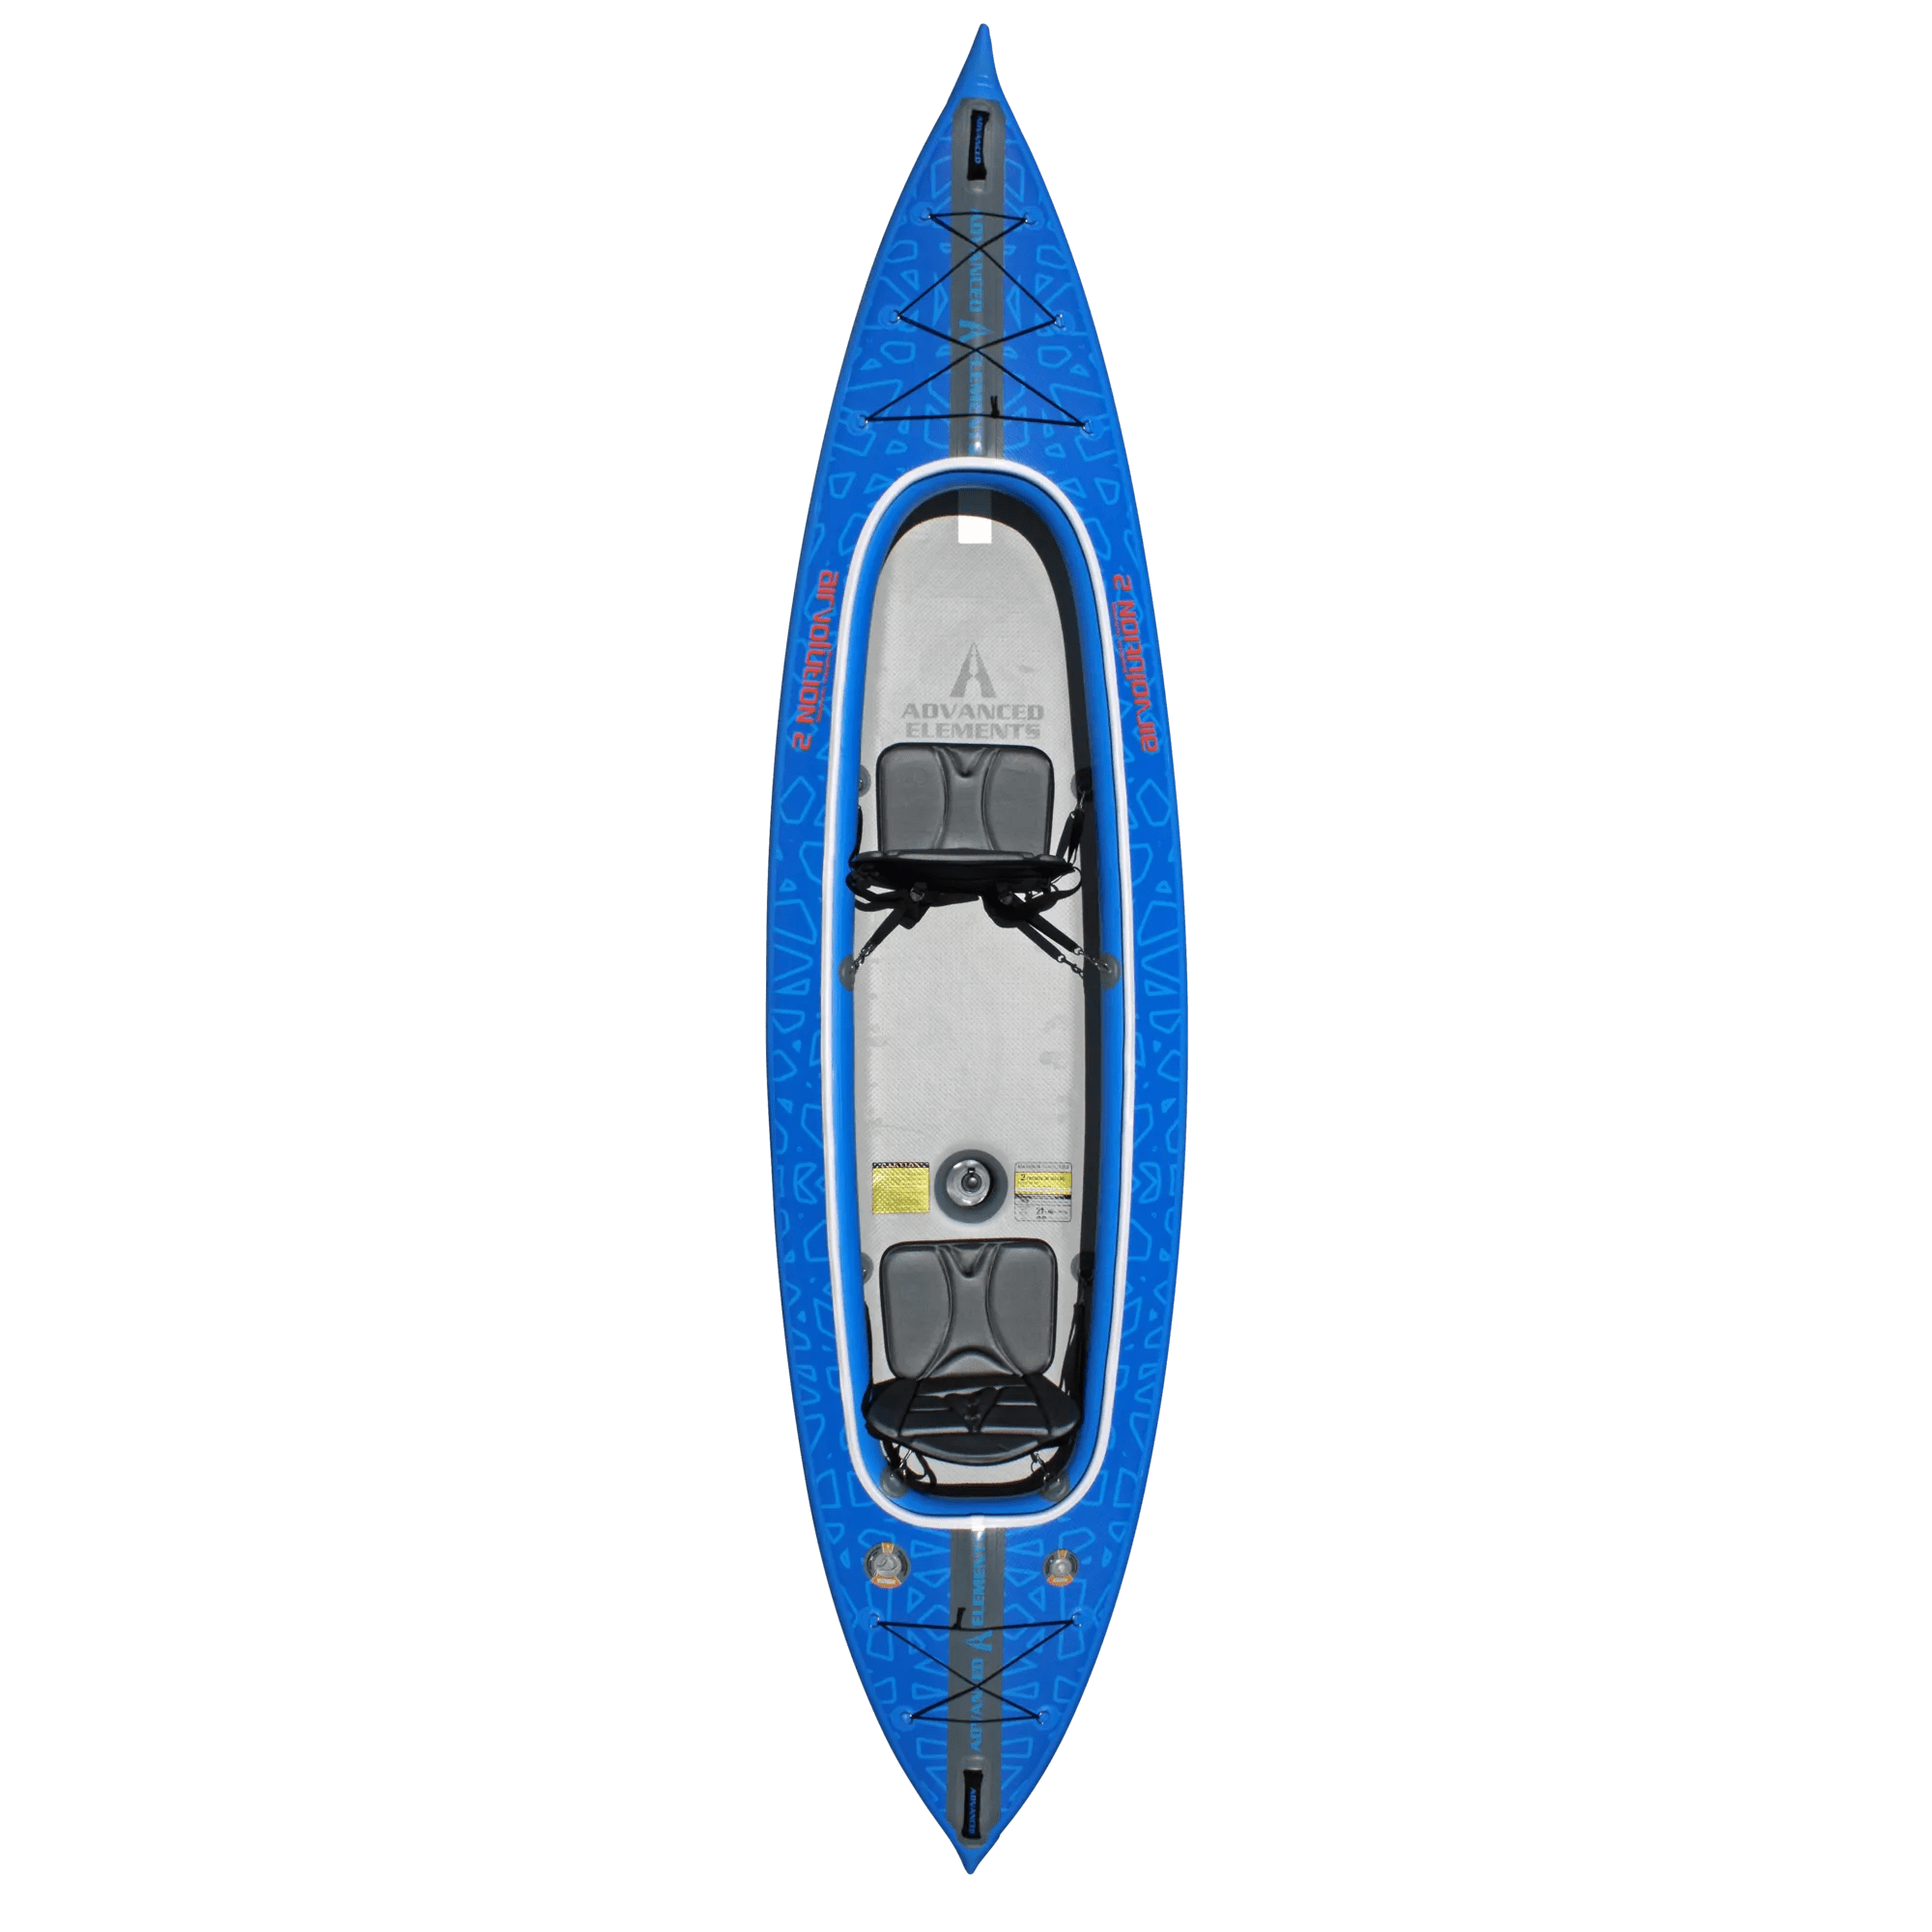 ADVANCED ELEMENTS - AirVolution2™ Recreational Kayak with Pump - Grey - AE3030 - TOP